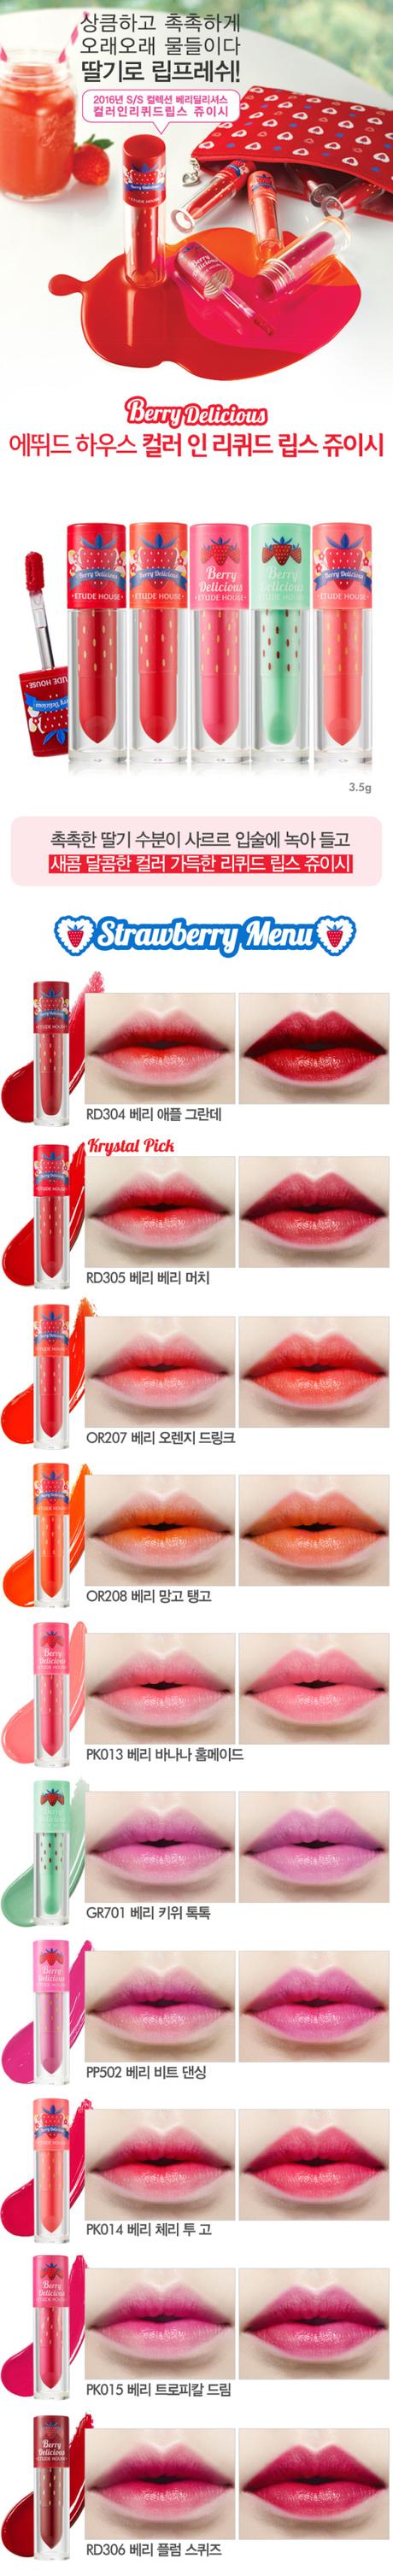 Etude house berry-delicious-color-of-liquid-lips